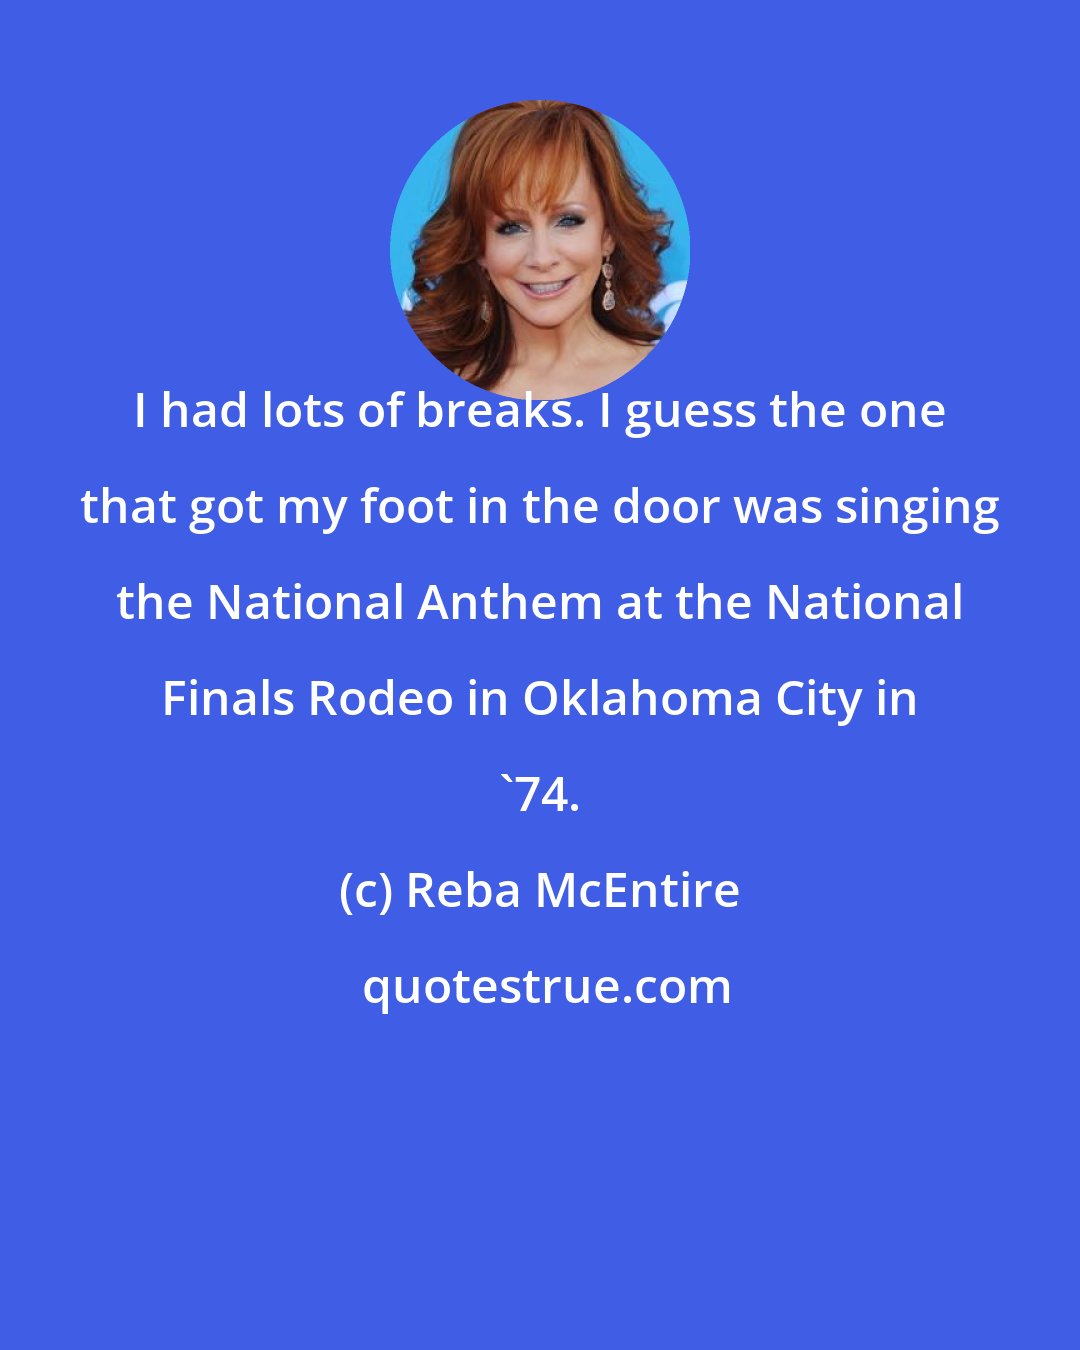 Reba McEntire: I had lots of breaks. I guess the one that got my foot in the door was singing the National Anthem at the National Finals Rodeo in Oklahoma City in '74.